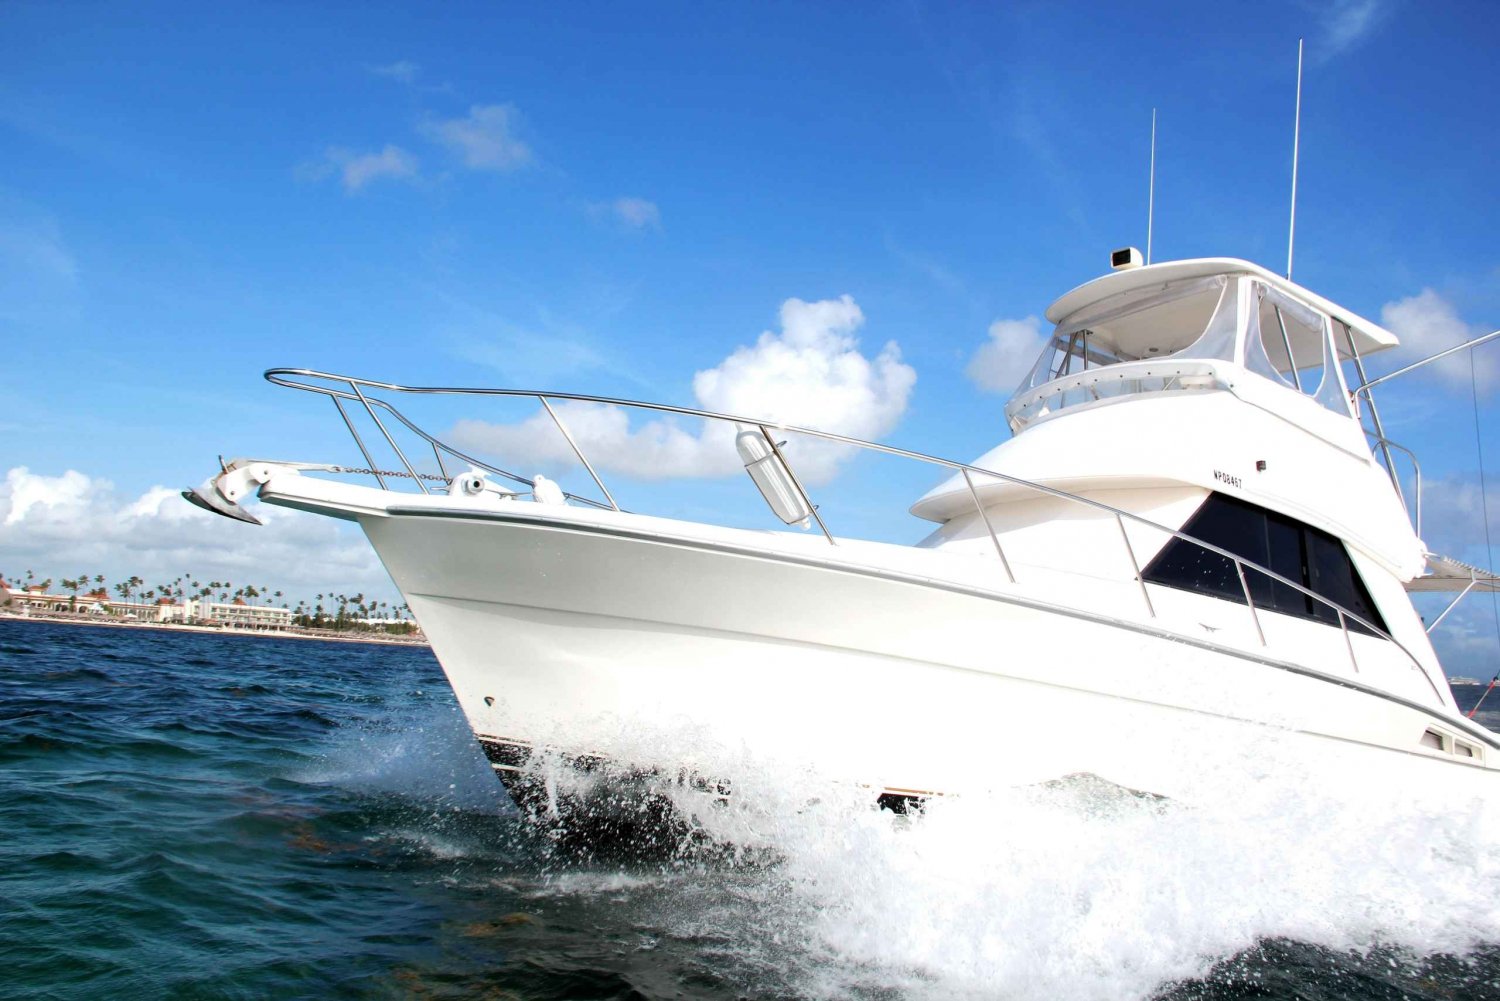 Private Fishing Charters 'Gone Dog' 37' boat offshore trip